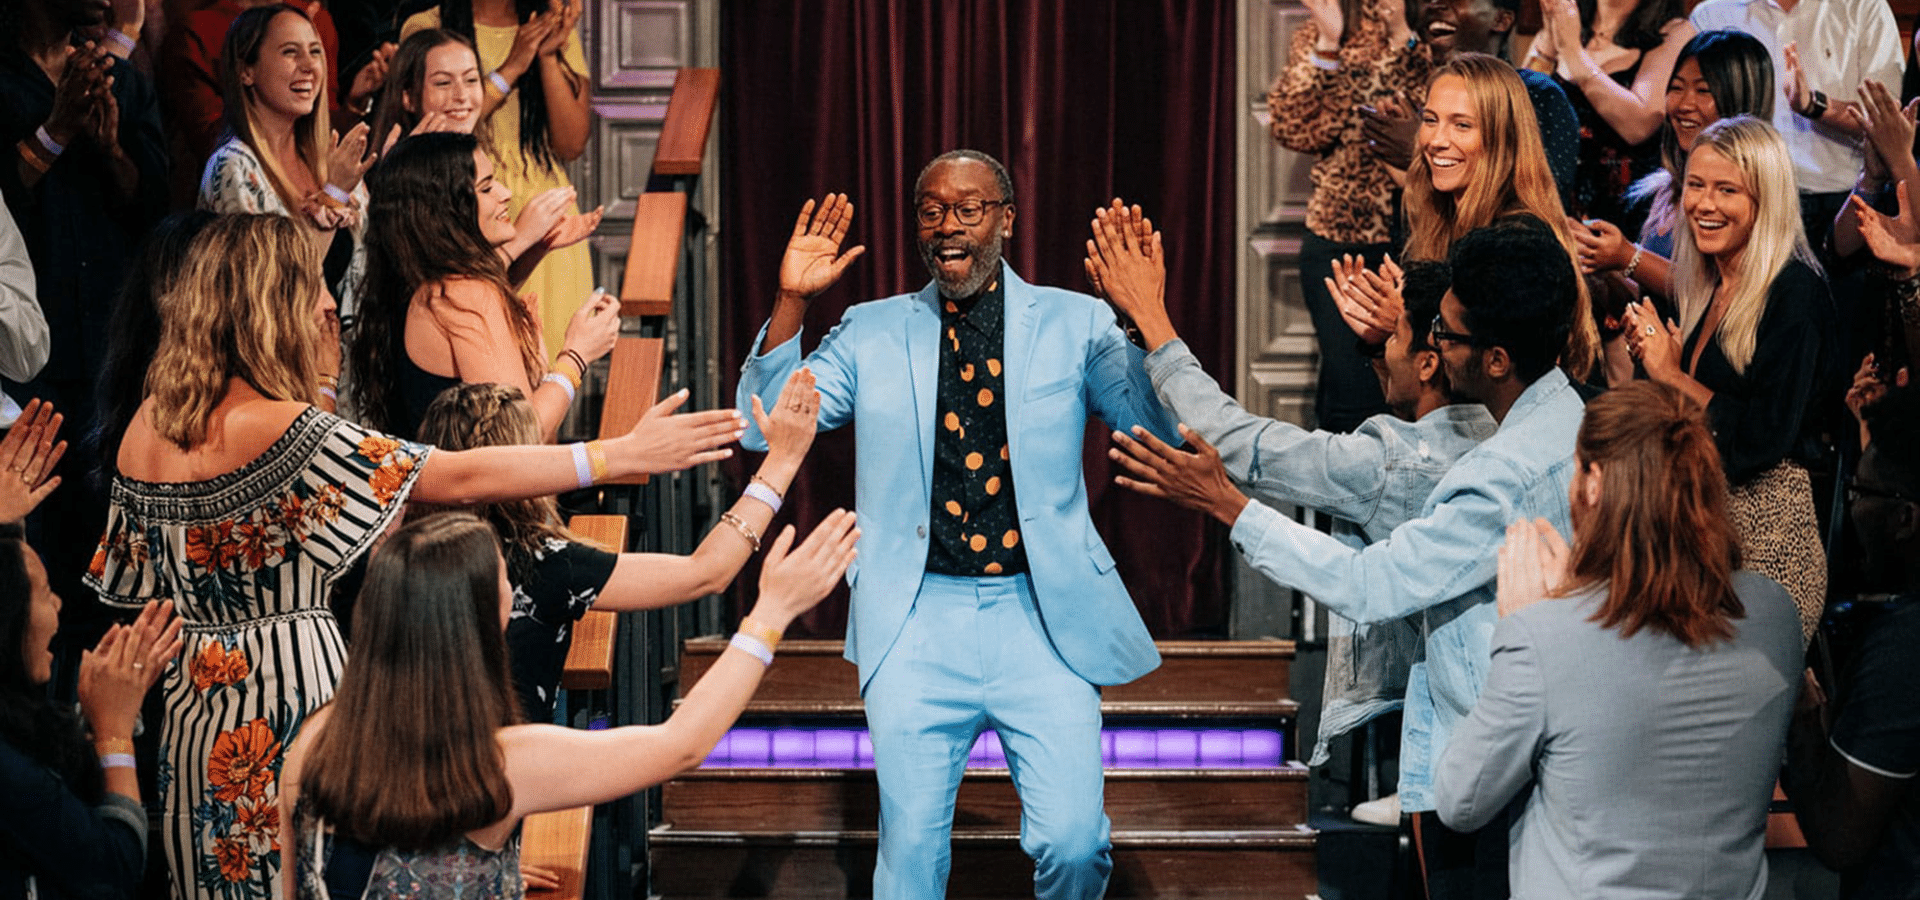 Don Cheadle in blue suit steps down stairs while high-fiving audience members